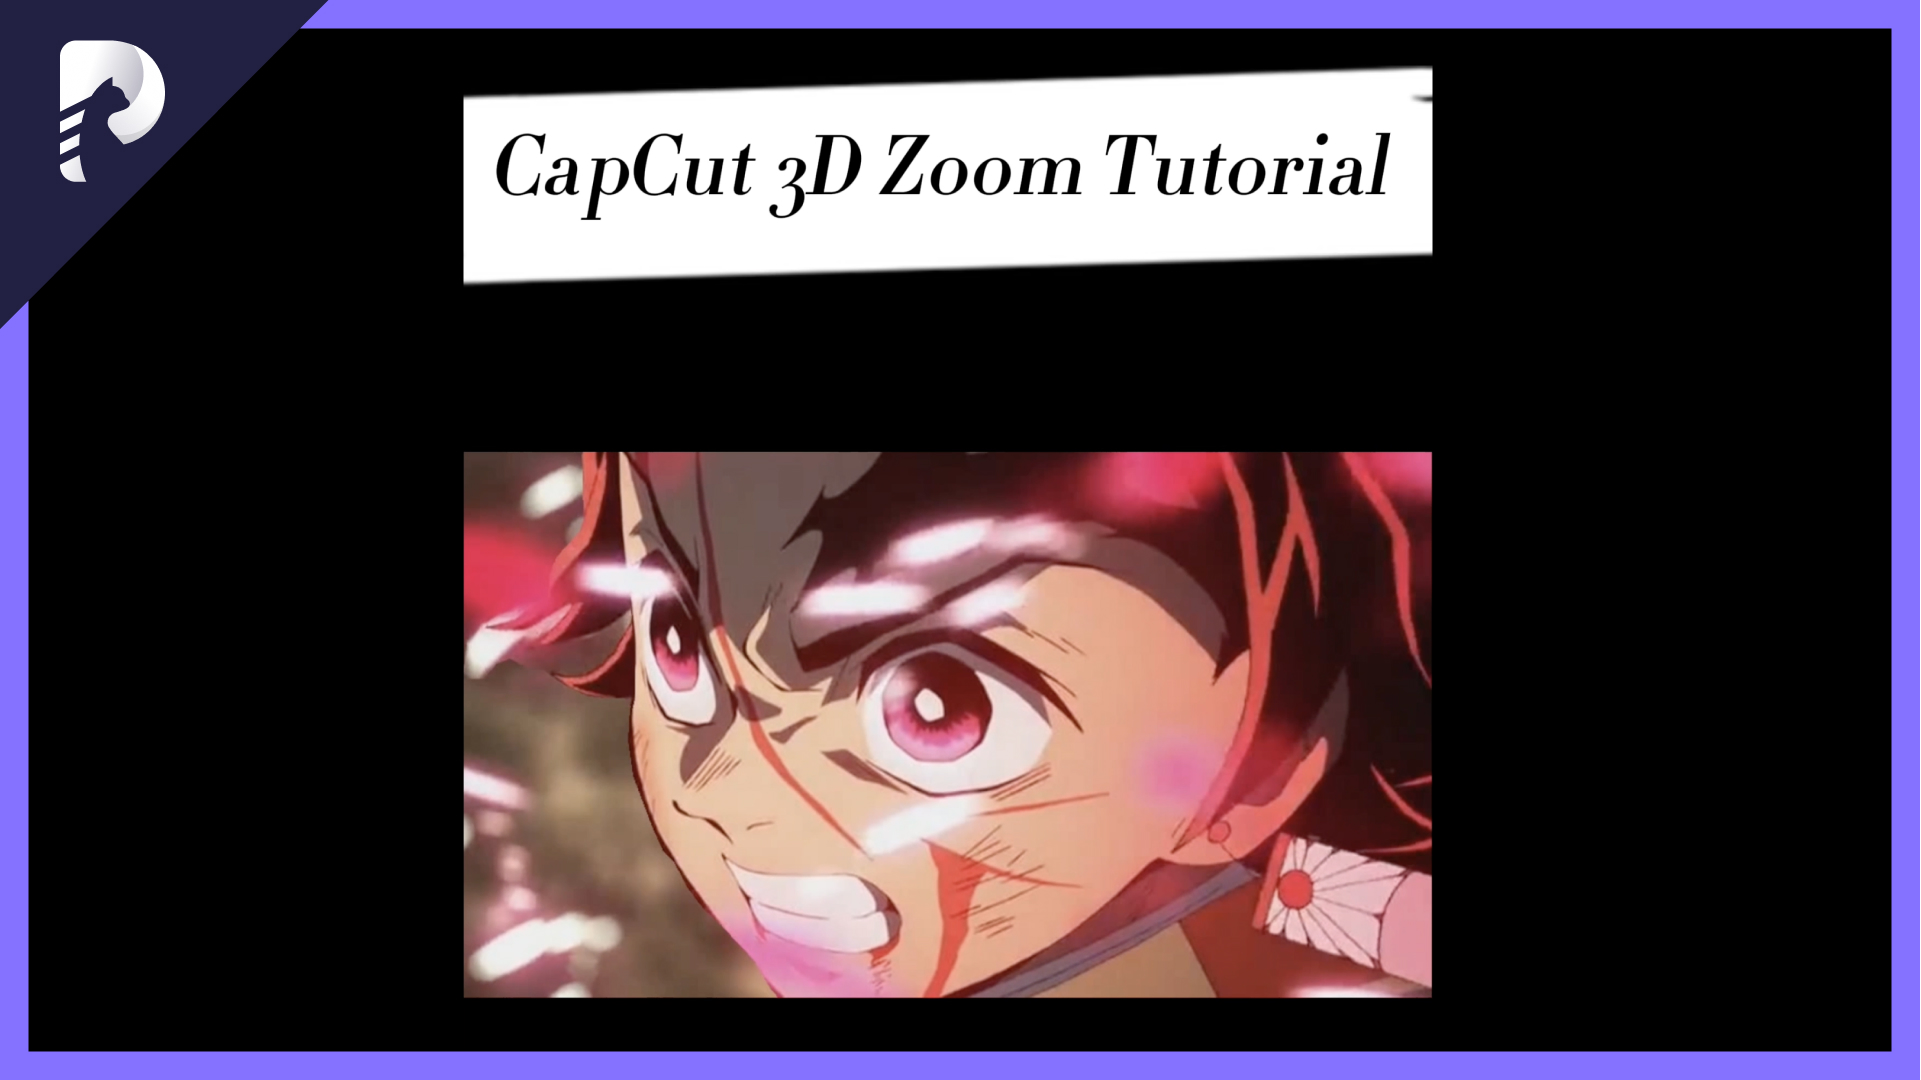 How to Use CapCut